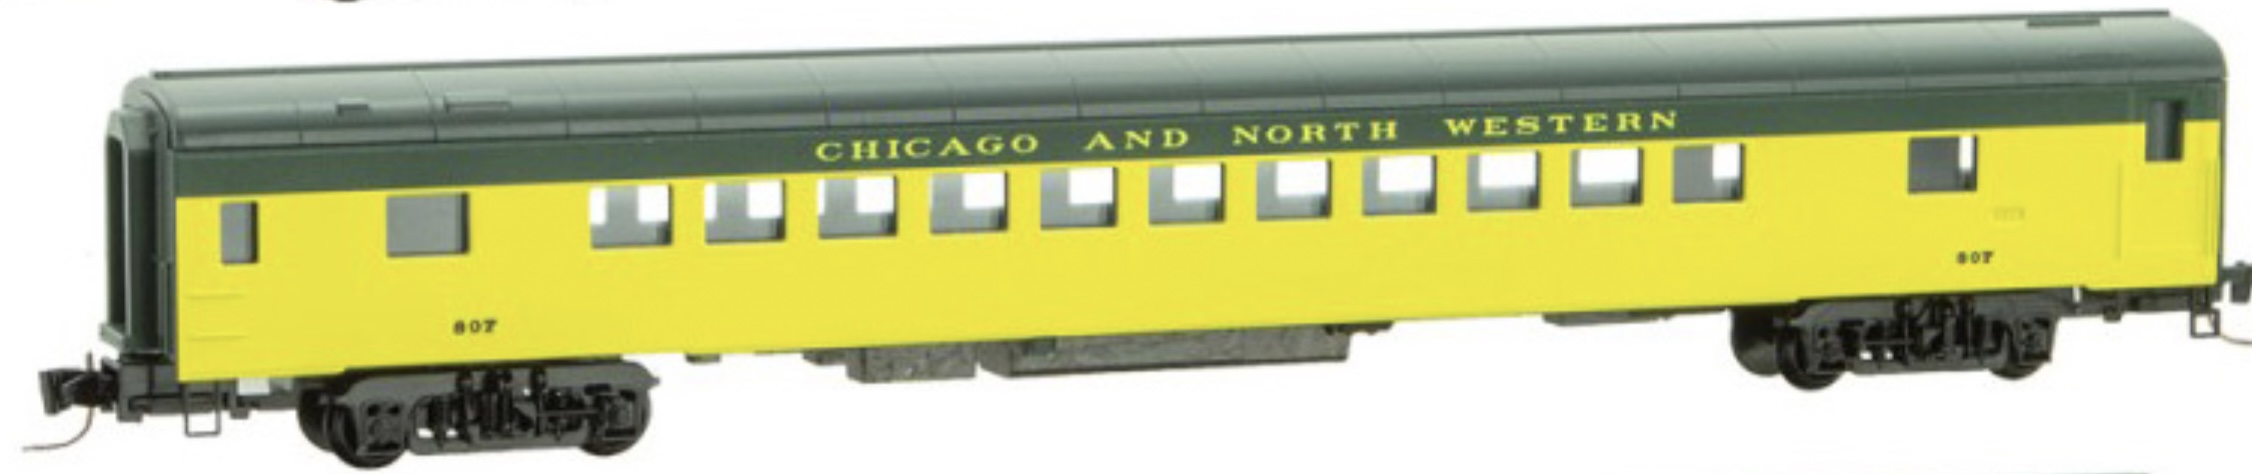 Z Scale - Micro-Trains - 552 52 220 - Passenger Car, Smoothside, Coach, 83-Foot - Chicago & North Western - 807